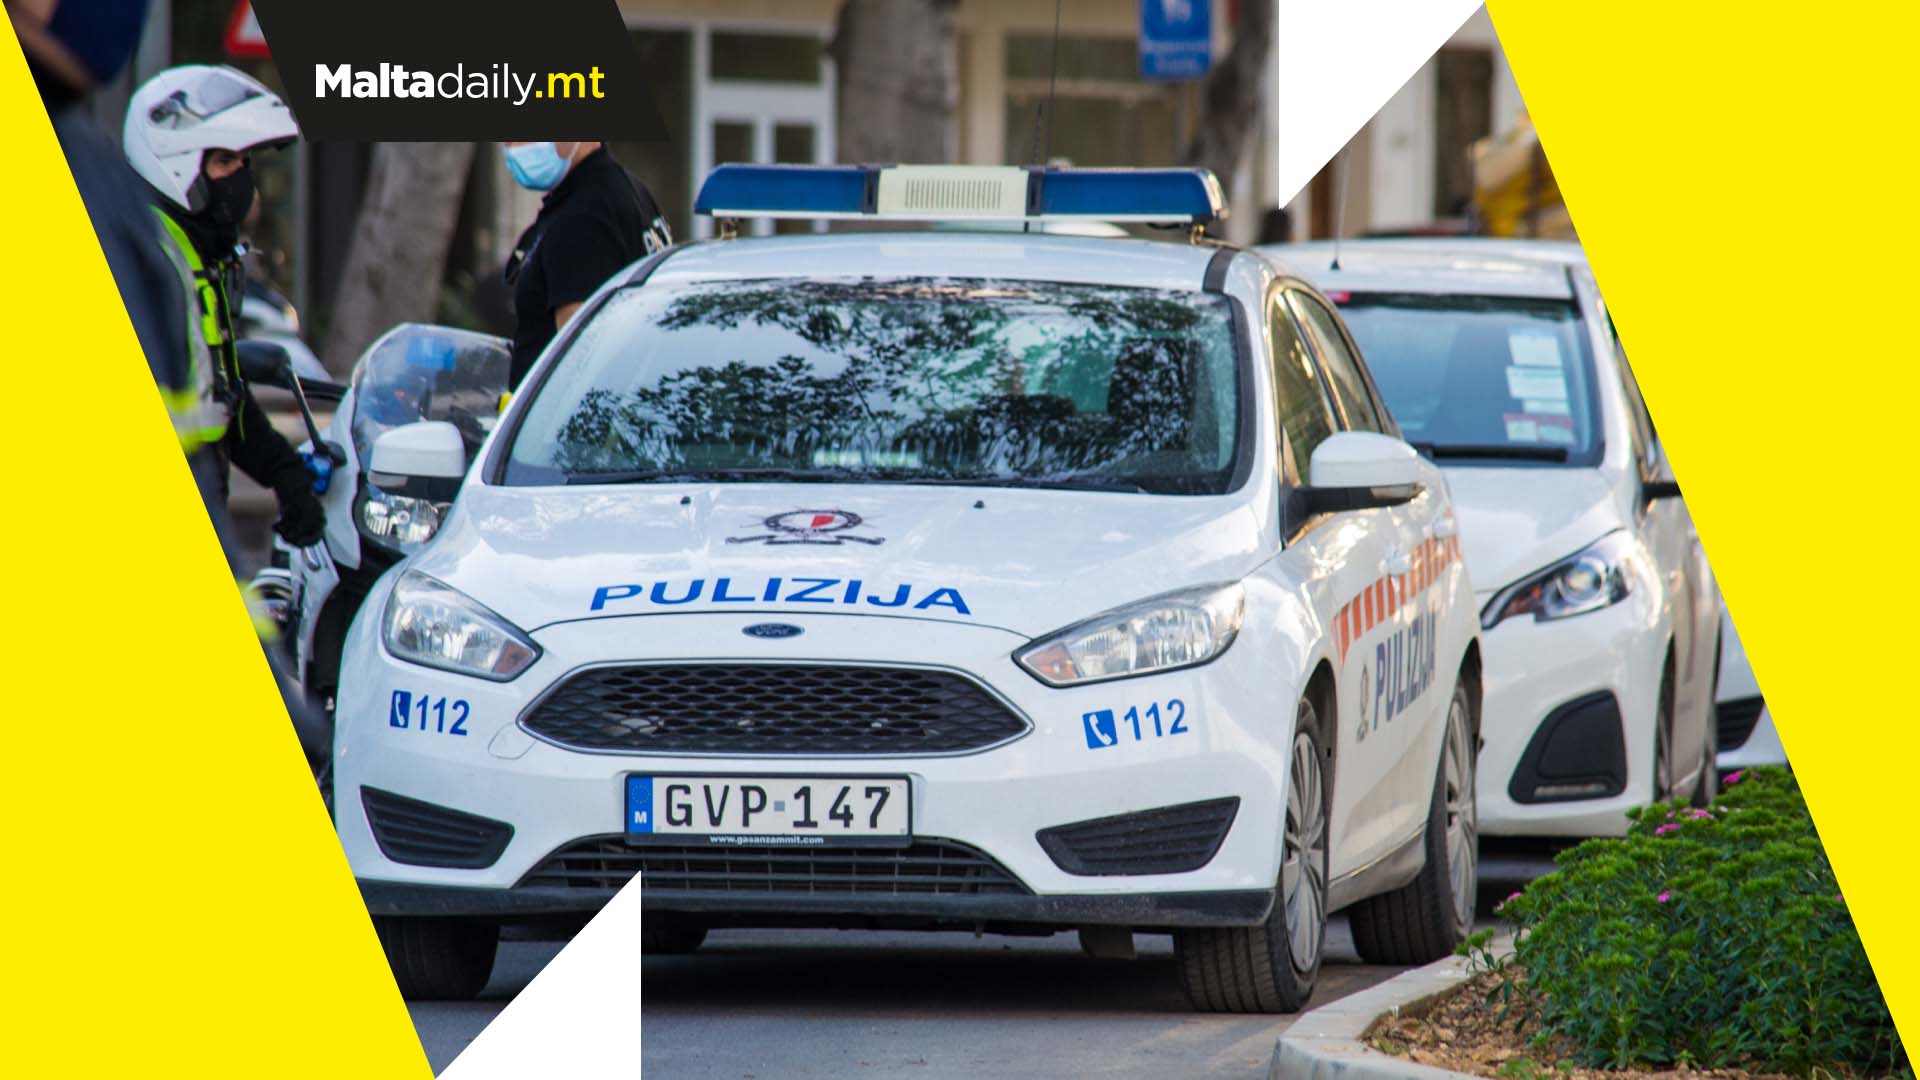 Man seriously injured after being hit by car in Marsa